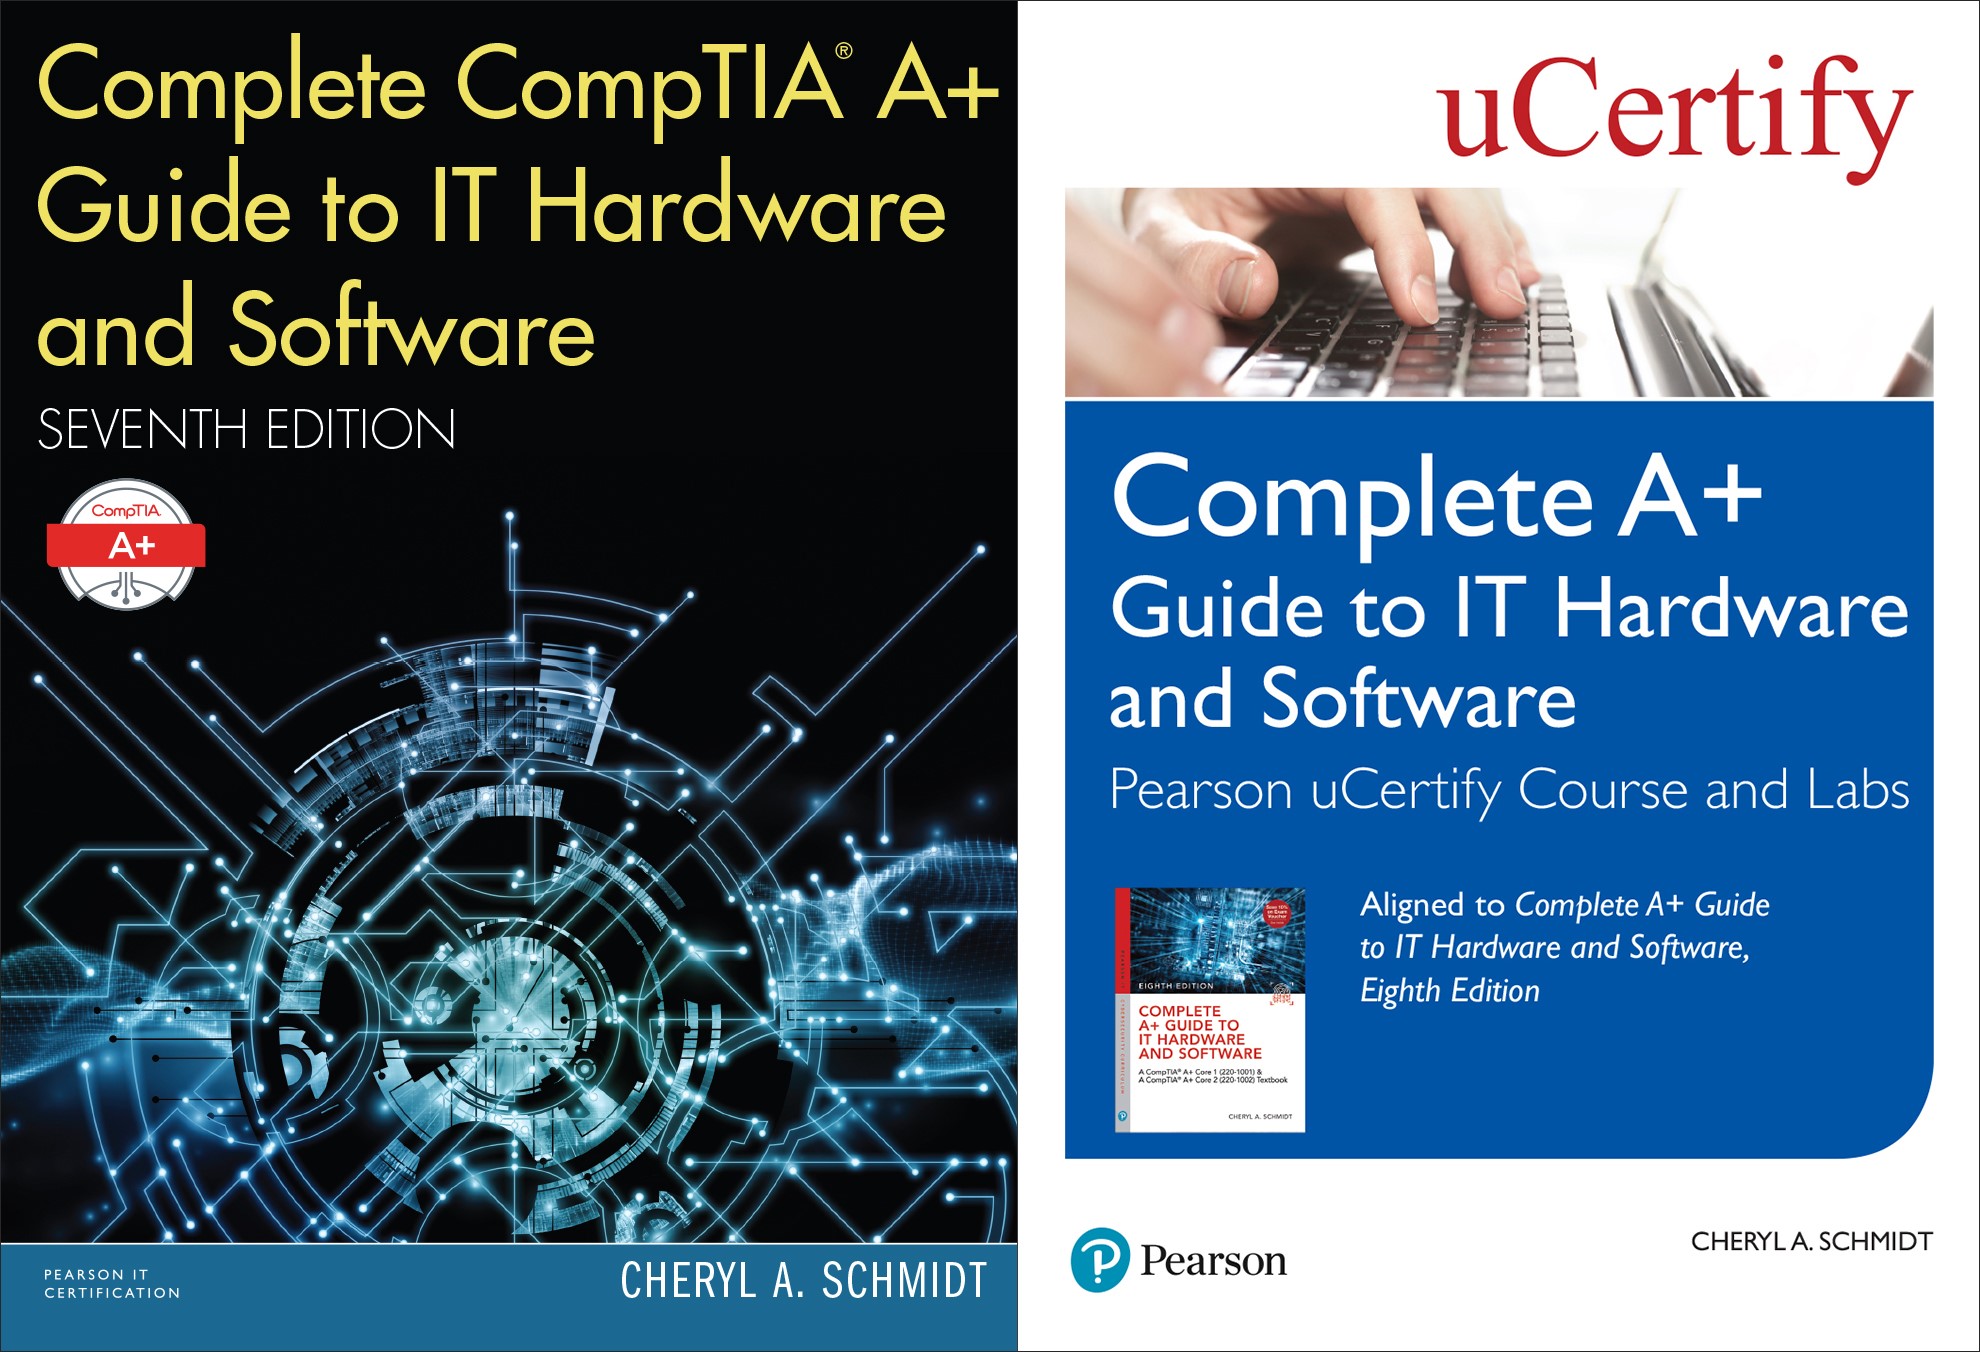 Complete A+ Guide to IT Hardware and Software uCertify Course and Labs Card and Textbook Bundle: A CompTIA A+ Core 1 (220-1001) & CompTIA A+ Core 2 (220-1002) Textbook, 8th Edition